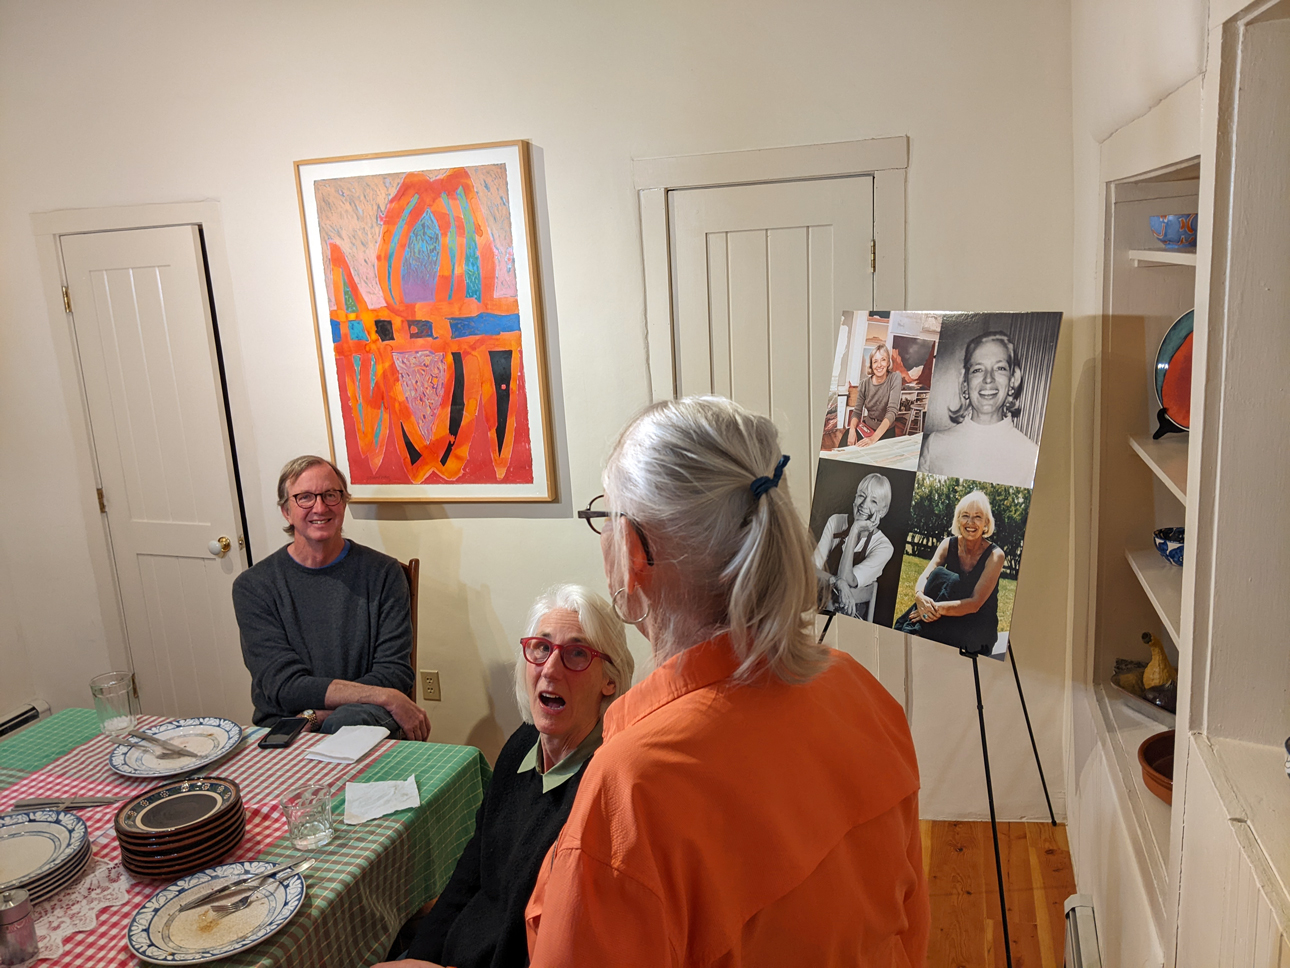 Celebratory dinner at 907 Canyon the next evening: Audrey, Jack, and his partner Dana Hawkes (from the dozen who attended); Mom portraits behind